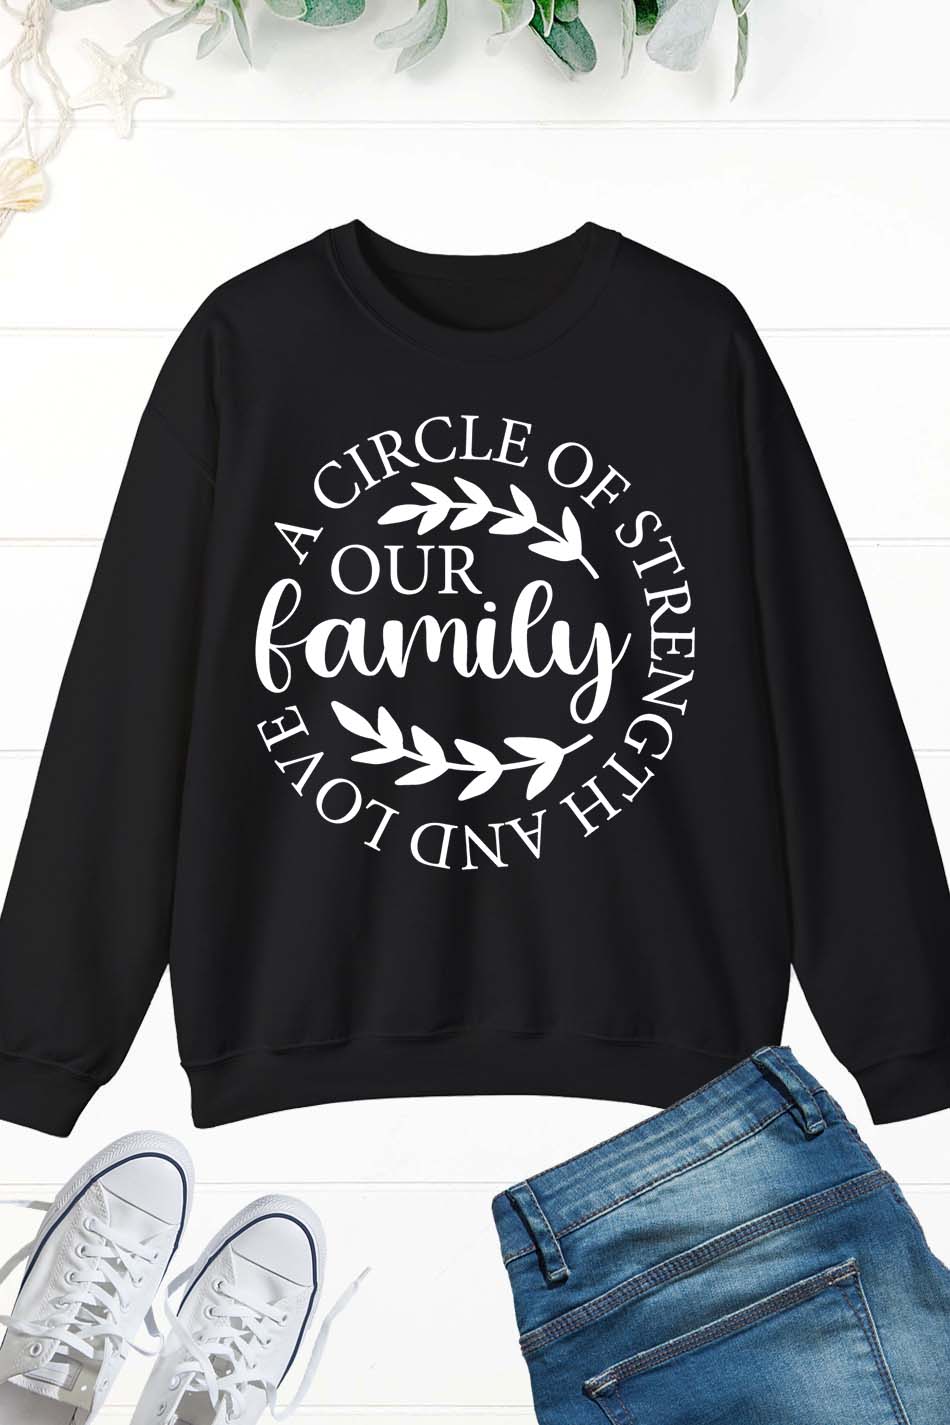 A Circle of Strength and Love Our Family Sweatshirts